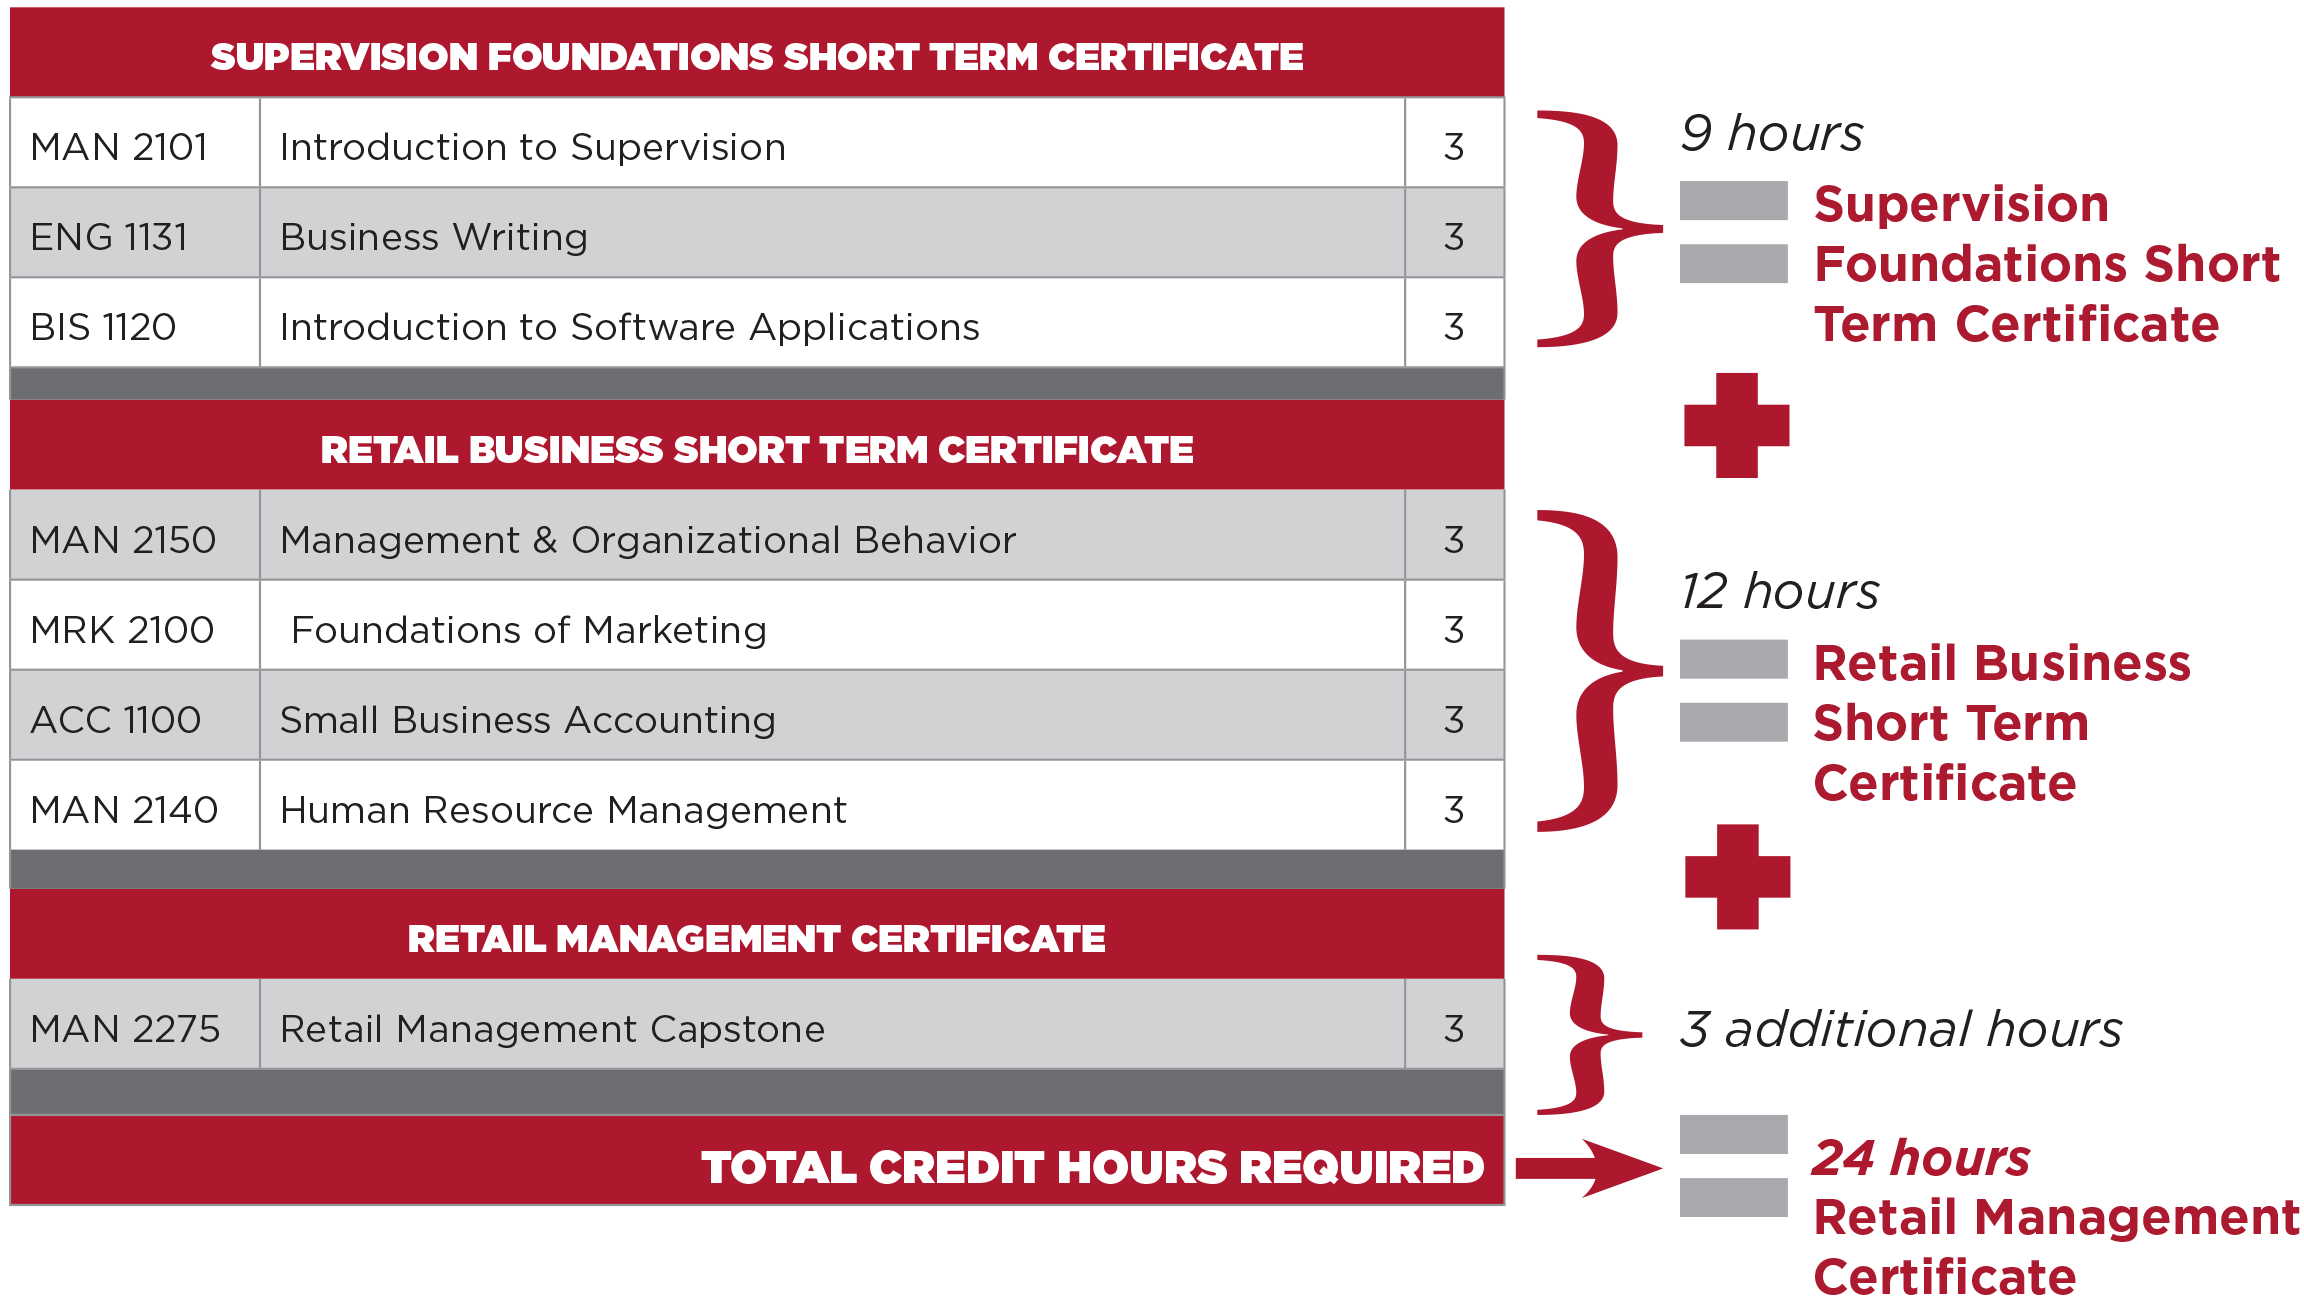 9 credit hours equals the Supervision Foundations Short Term Certificate. An additional 12 credit hours equals the Retail Business Short Term Certificate. A final 3 additional credit hours equals a total of 24 credit hours and the Retail Management Certificate.